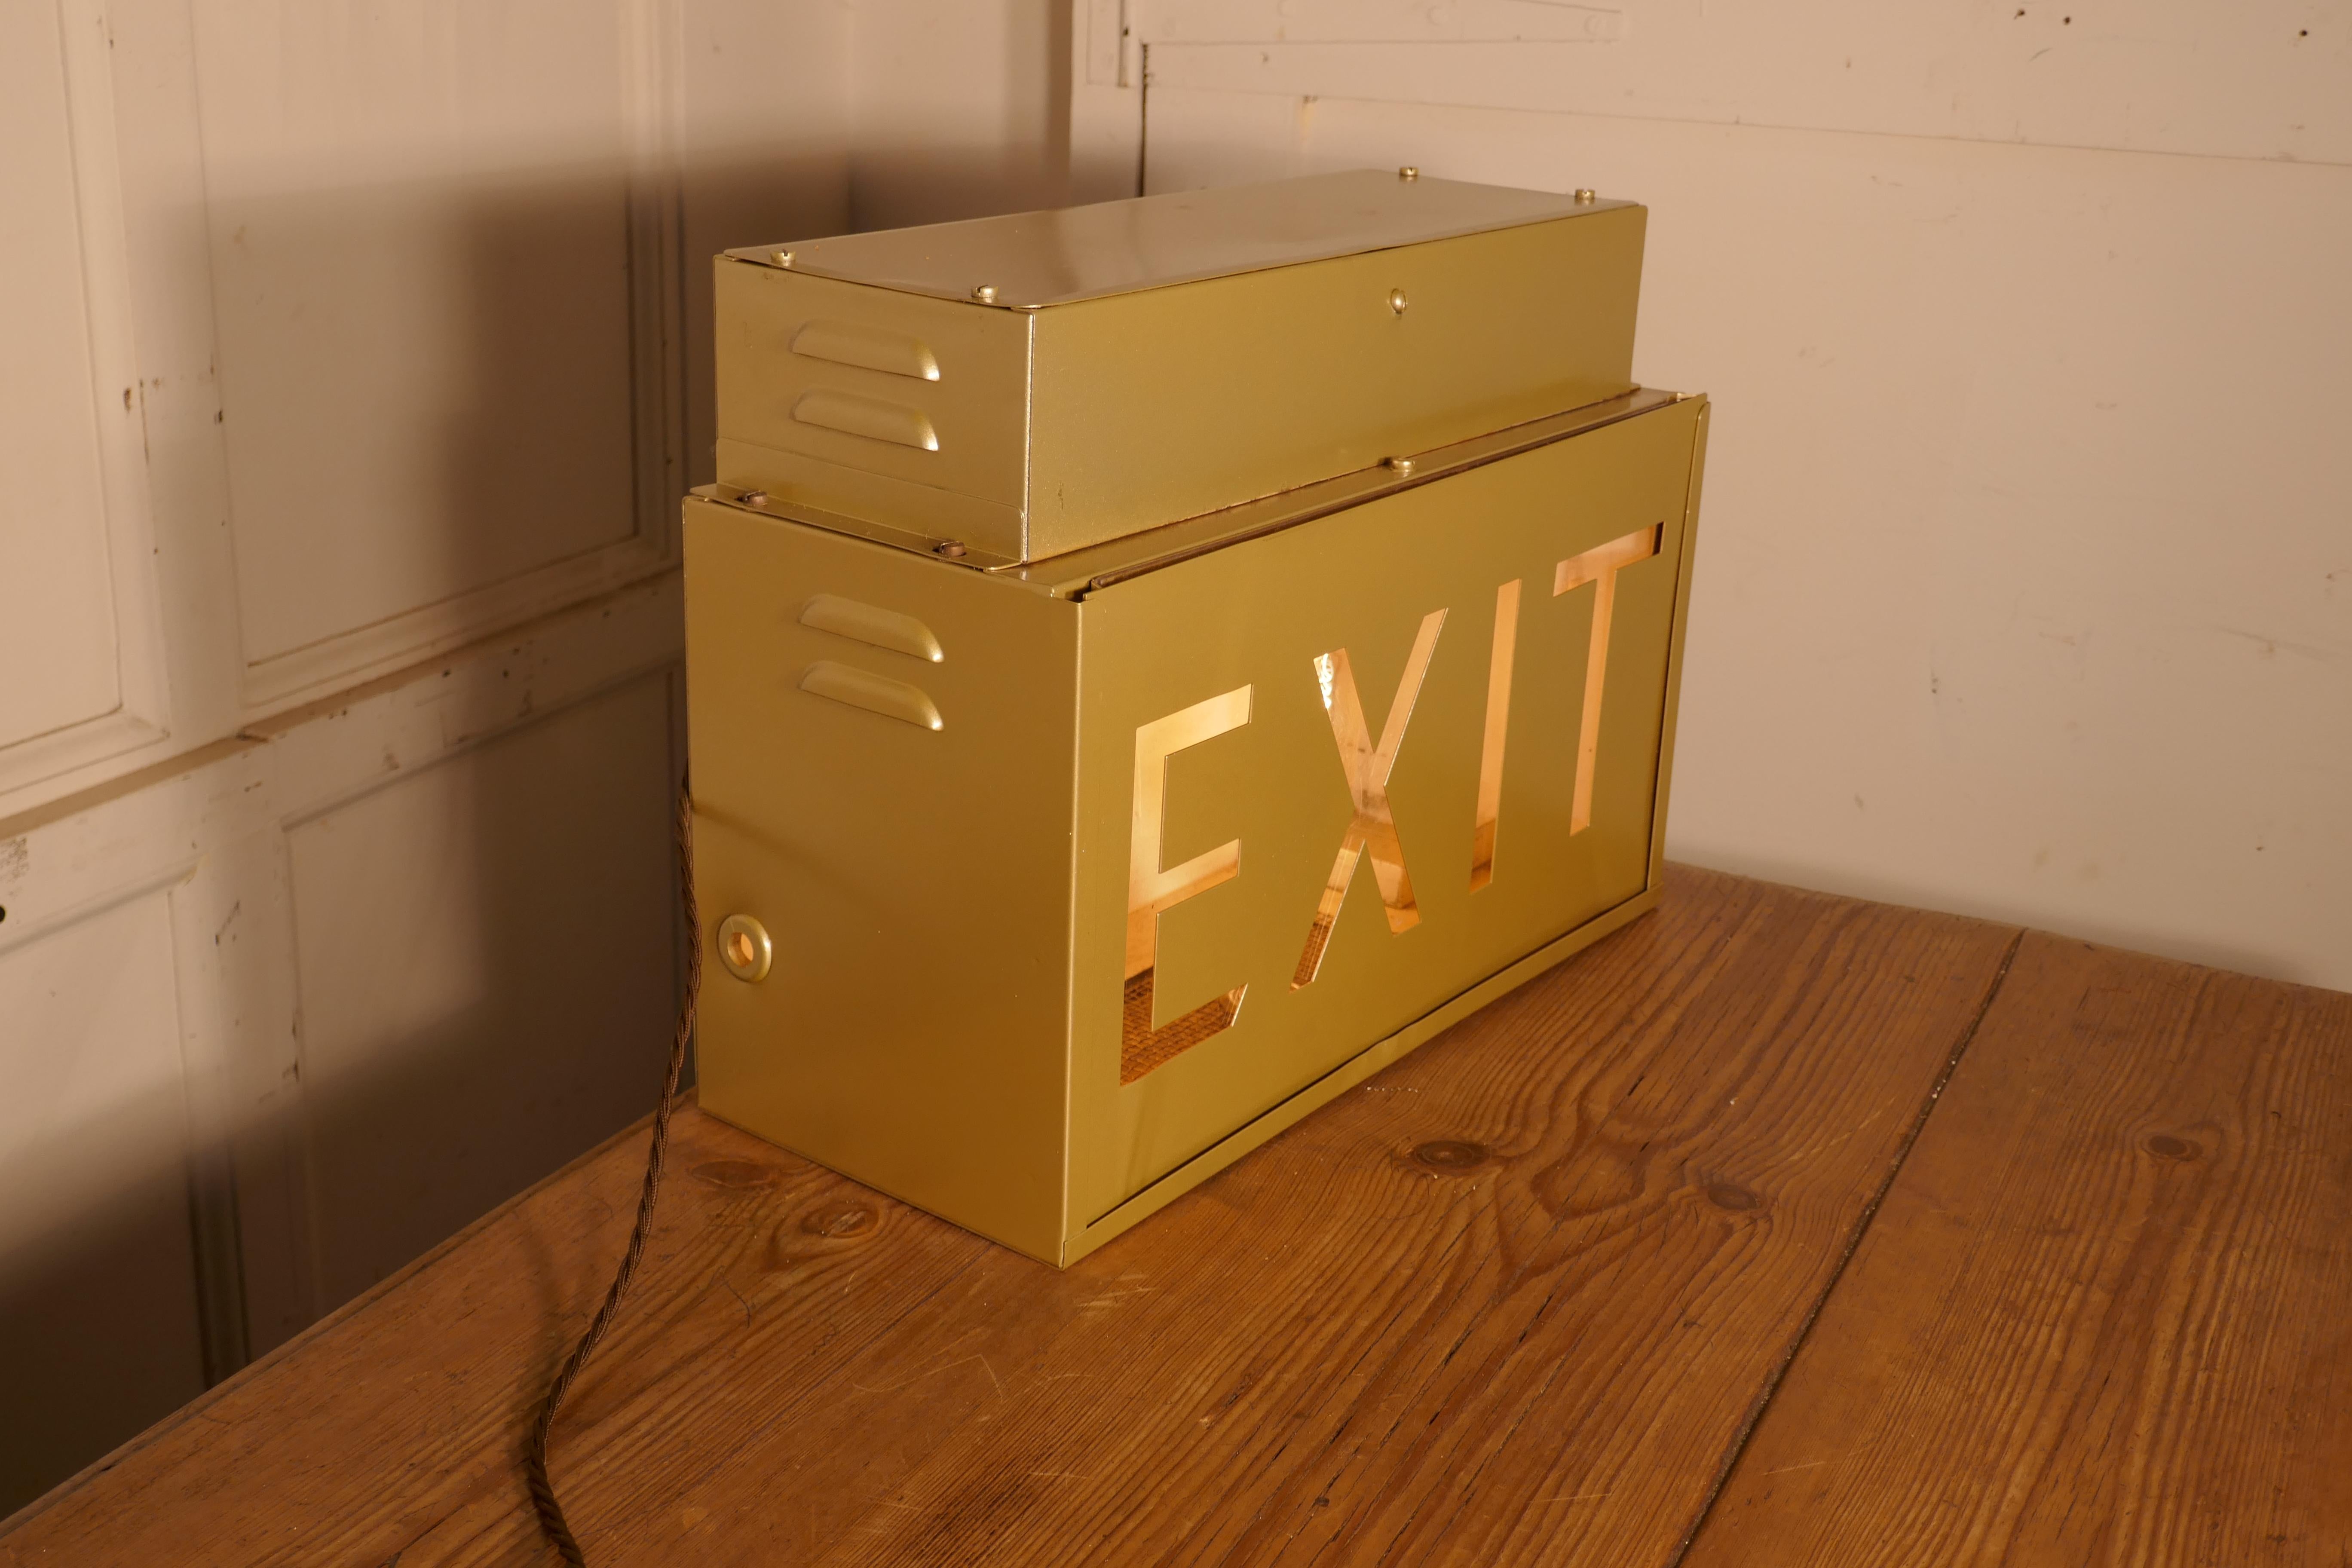 Art Deco Gold Odeon Cinema Exit Sign Electric Light 